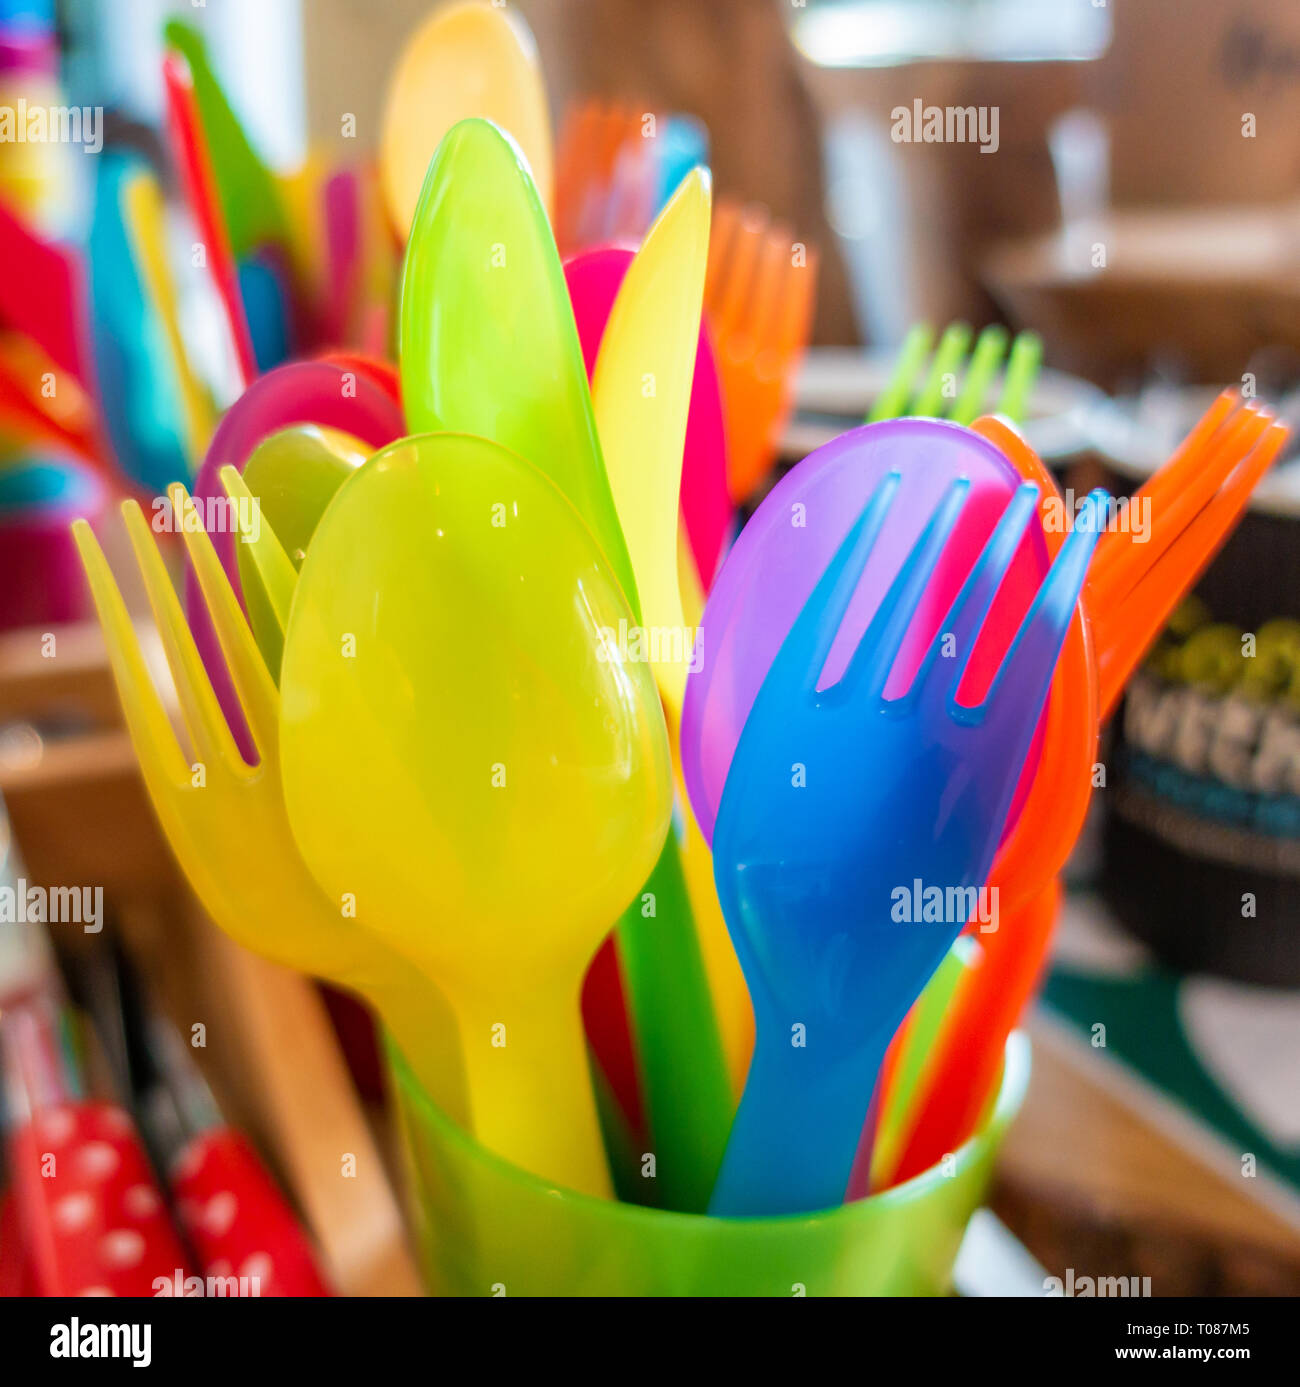 Colourful child safe plastic cutlery Stock Photo